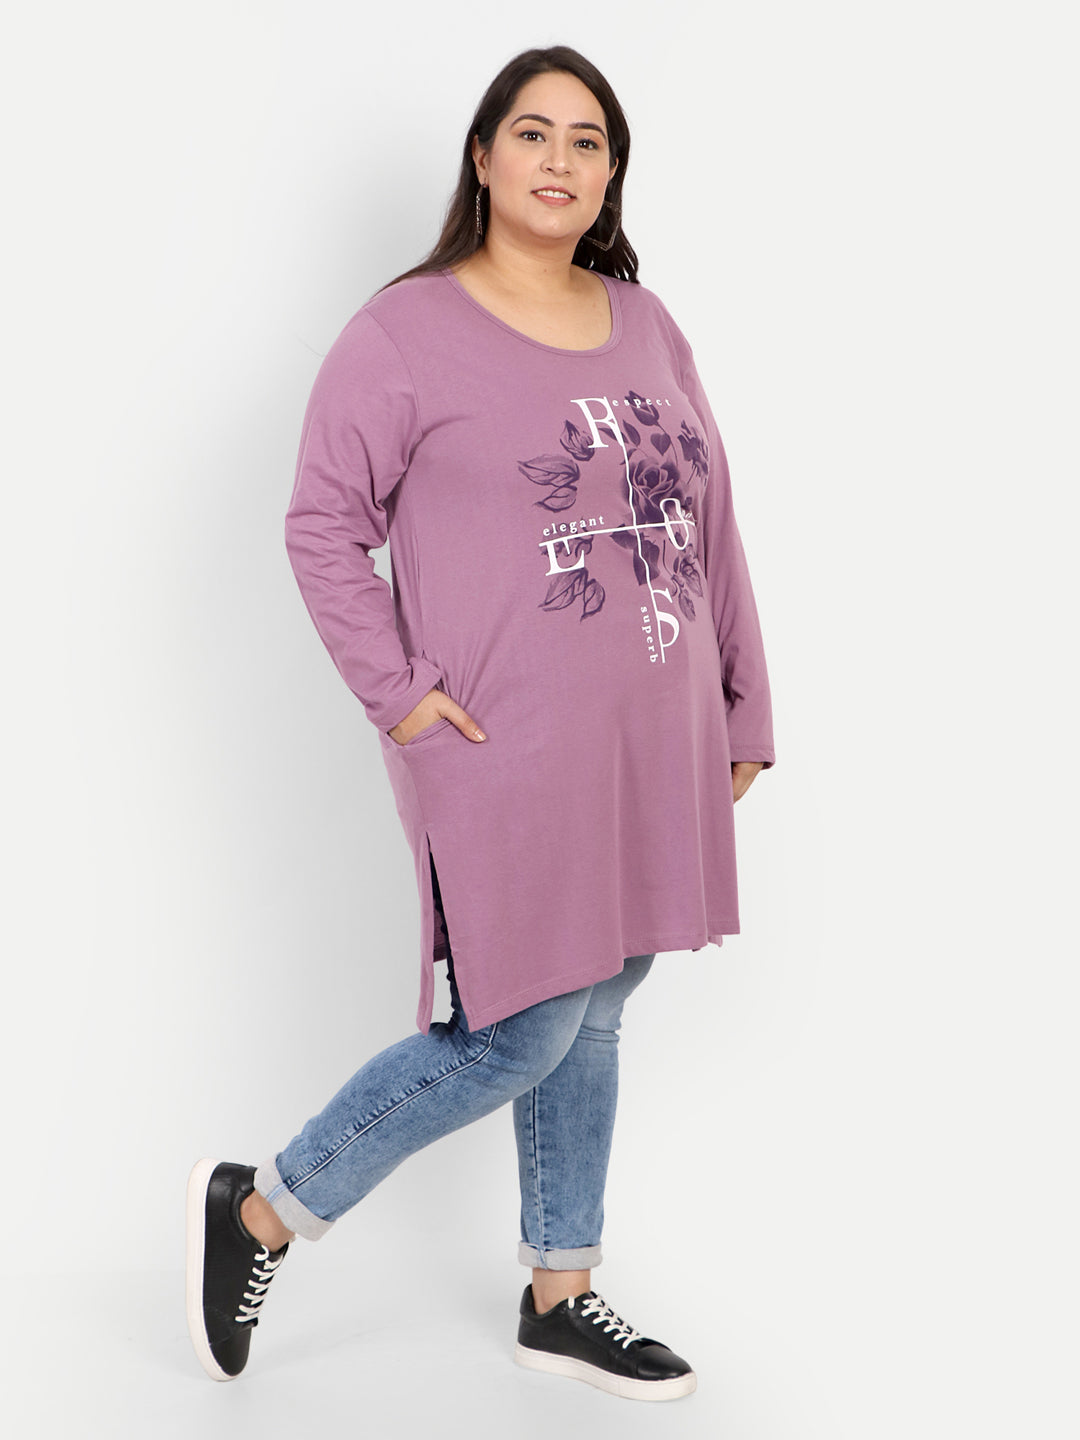 Cotton Long Top for Women Plus Size - Full Sleeve - Lavender